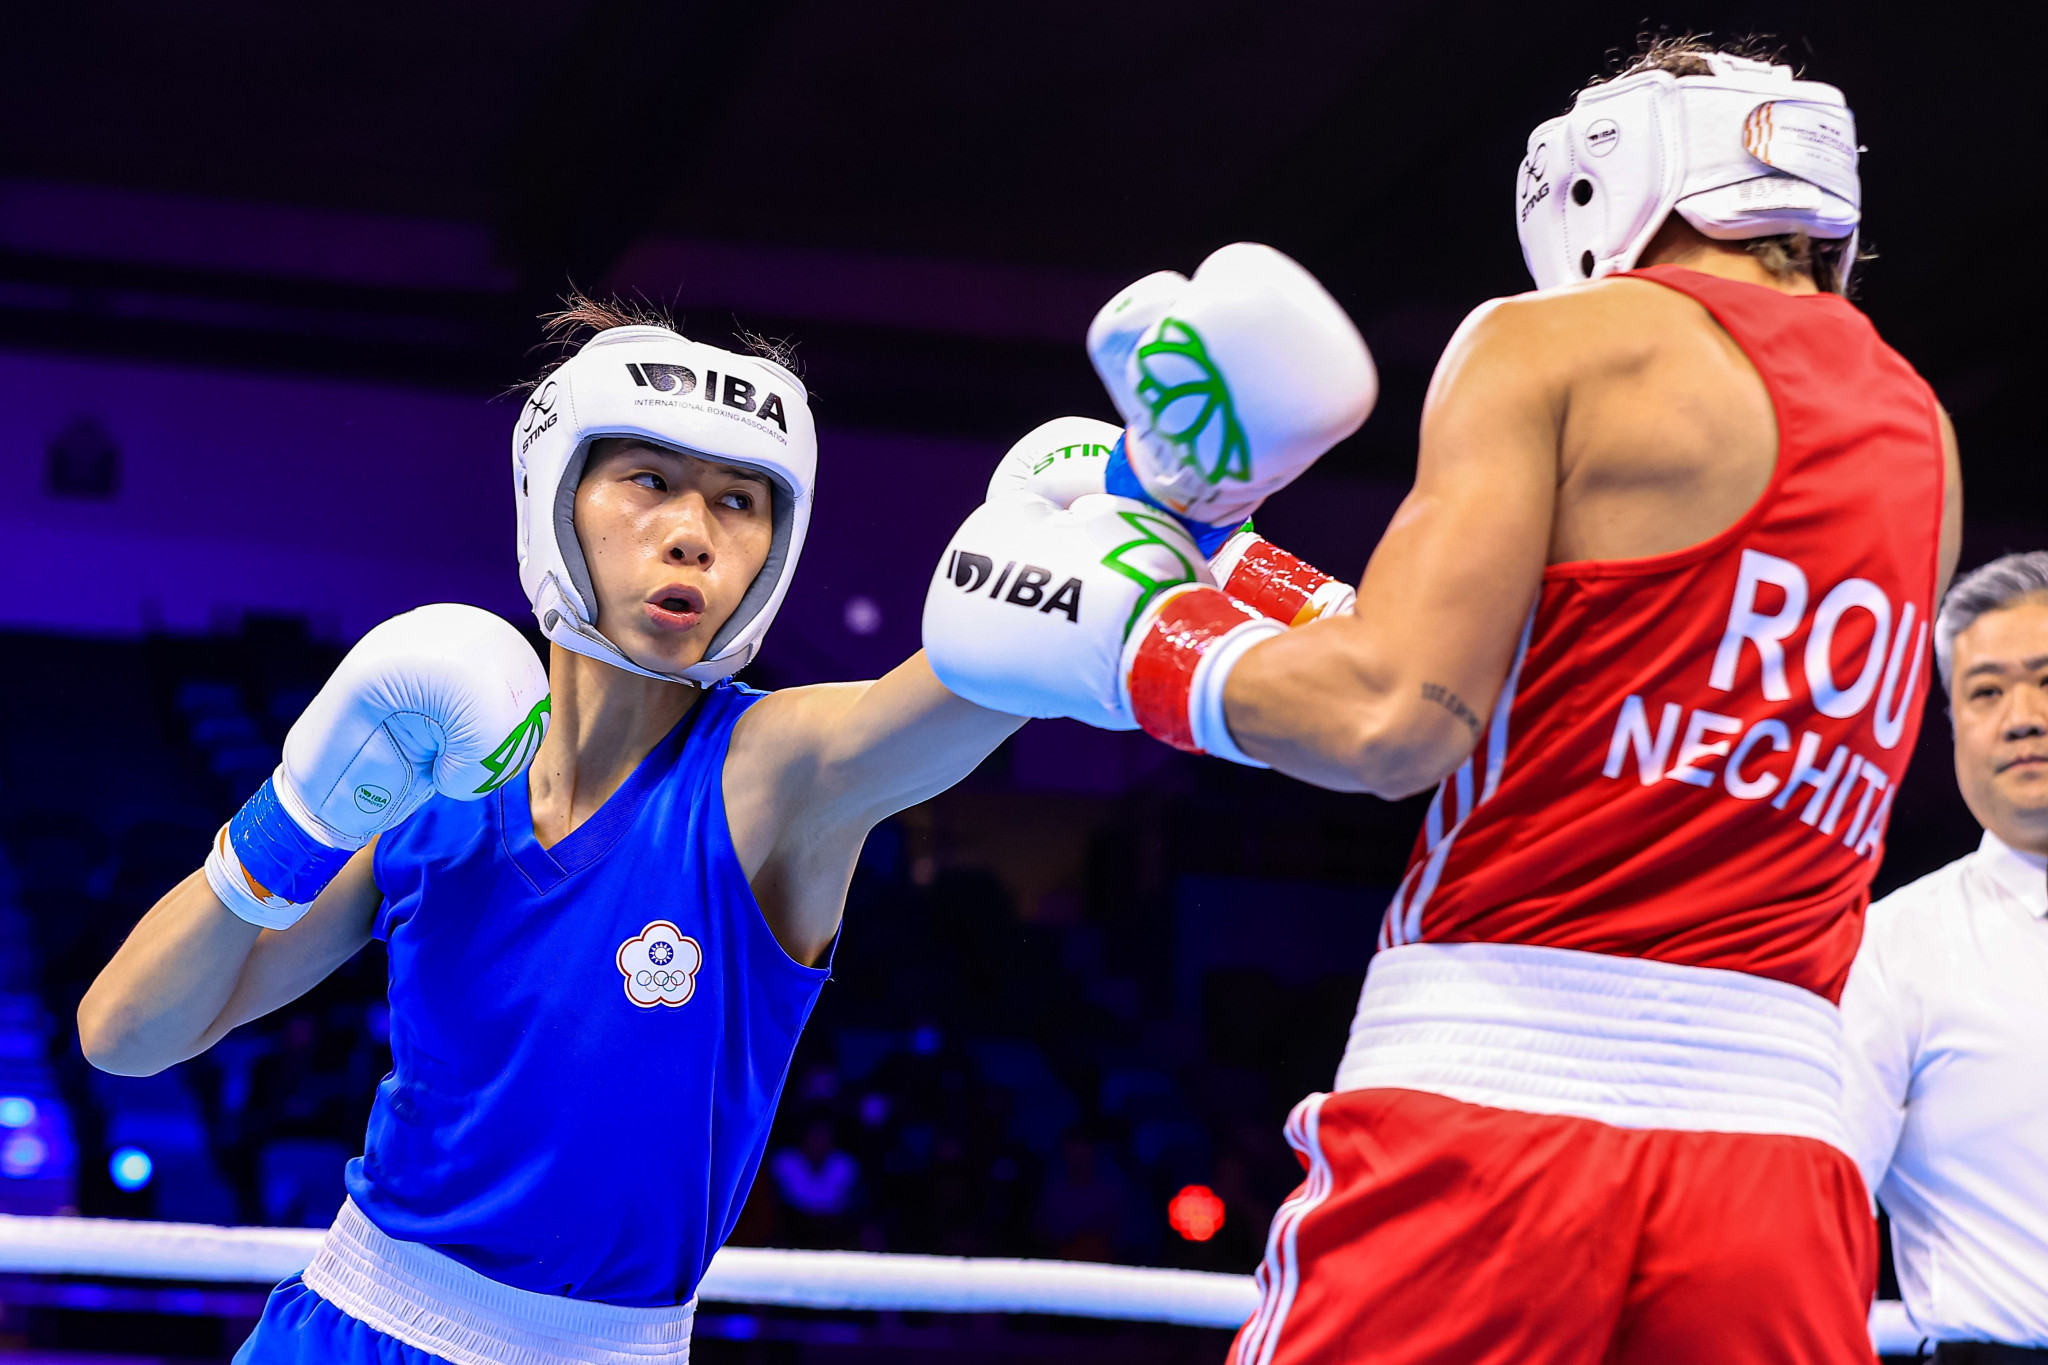 Lin launches title defence with win as Testa passes first test at IBA Women's World Championships